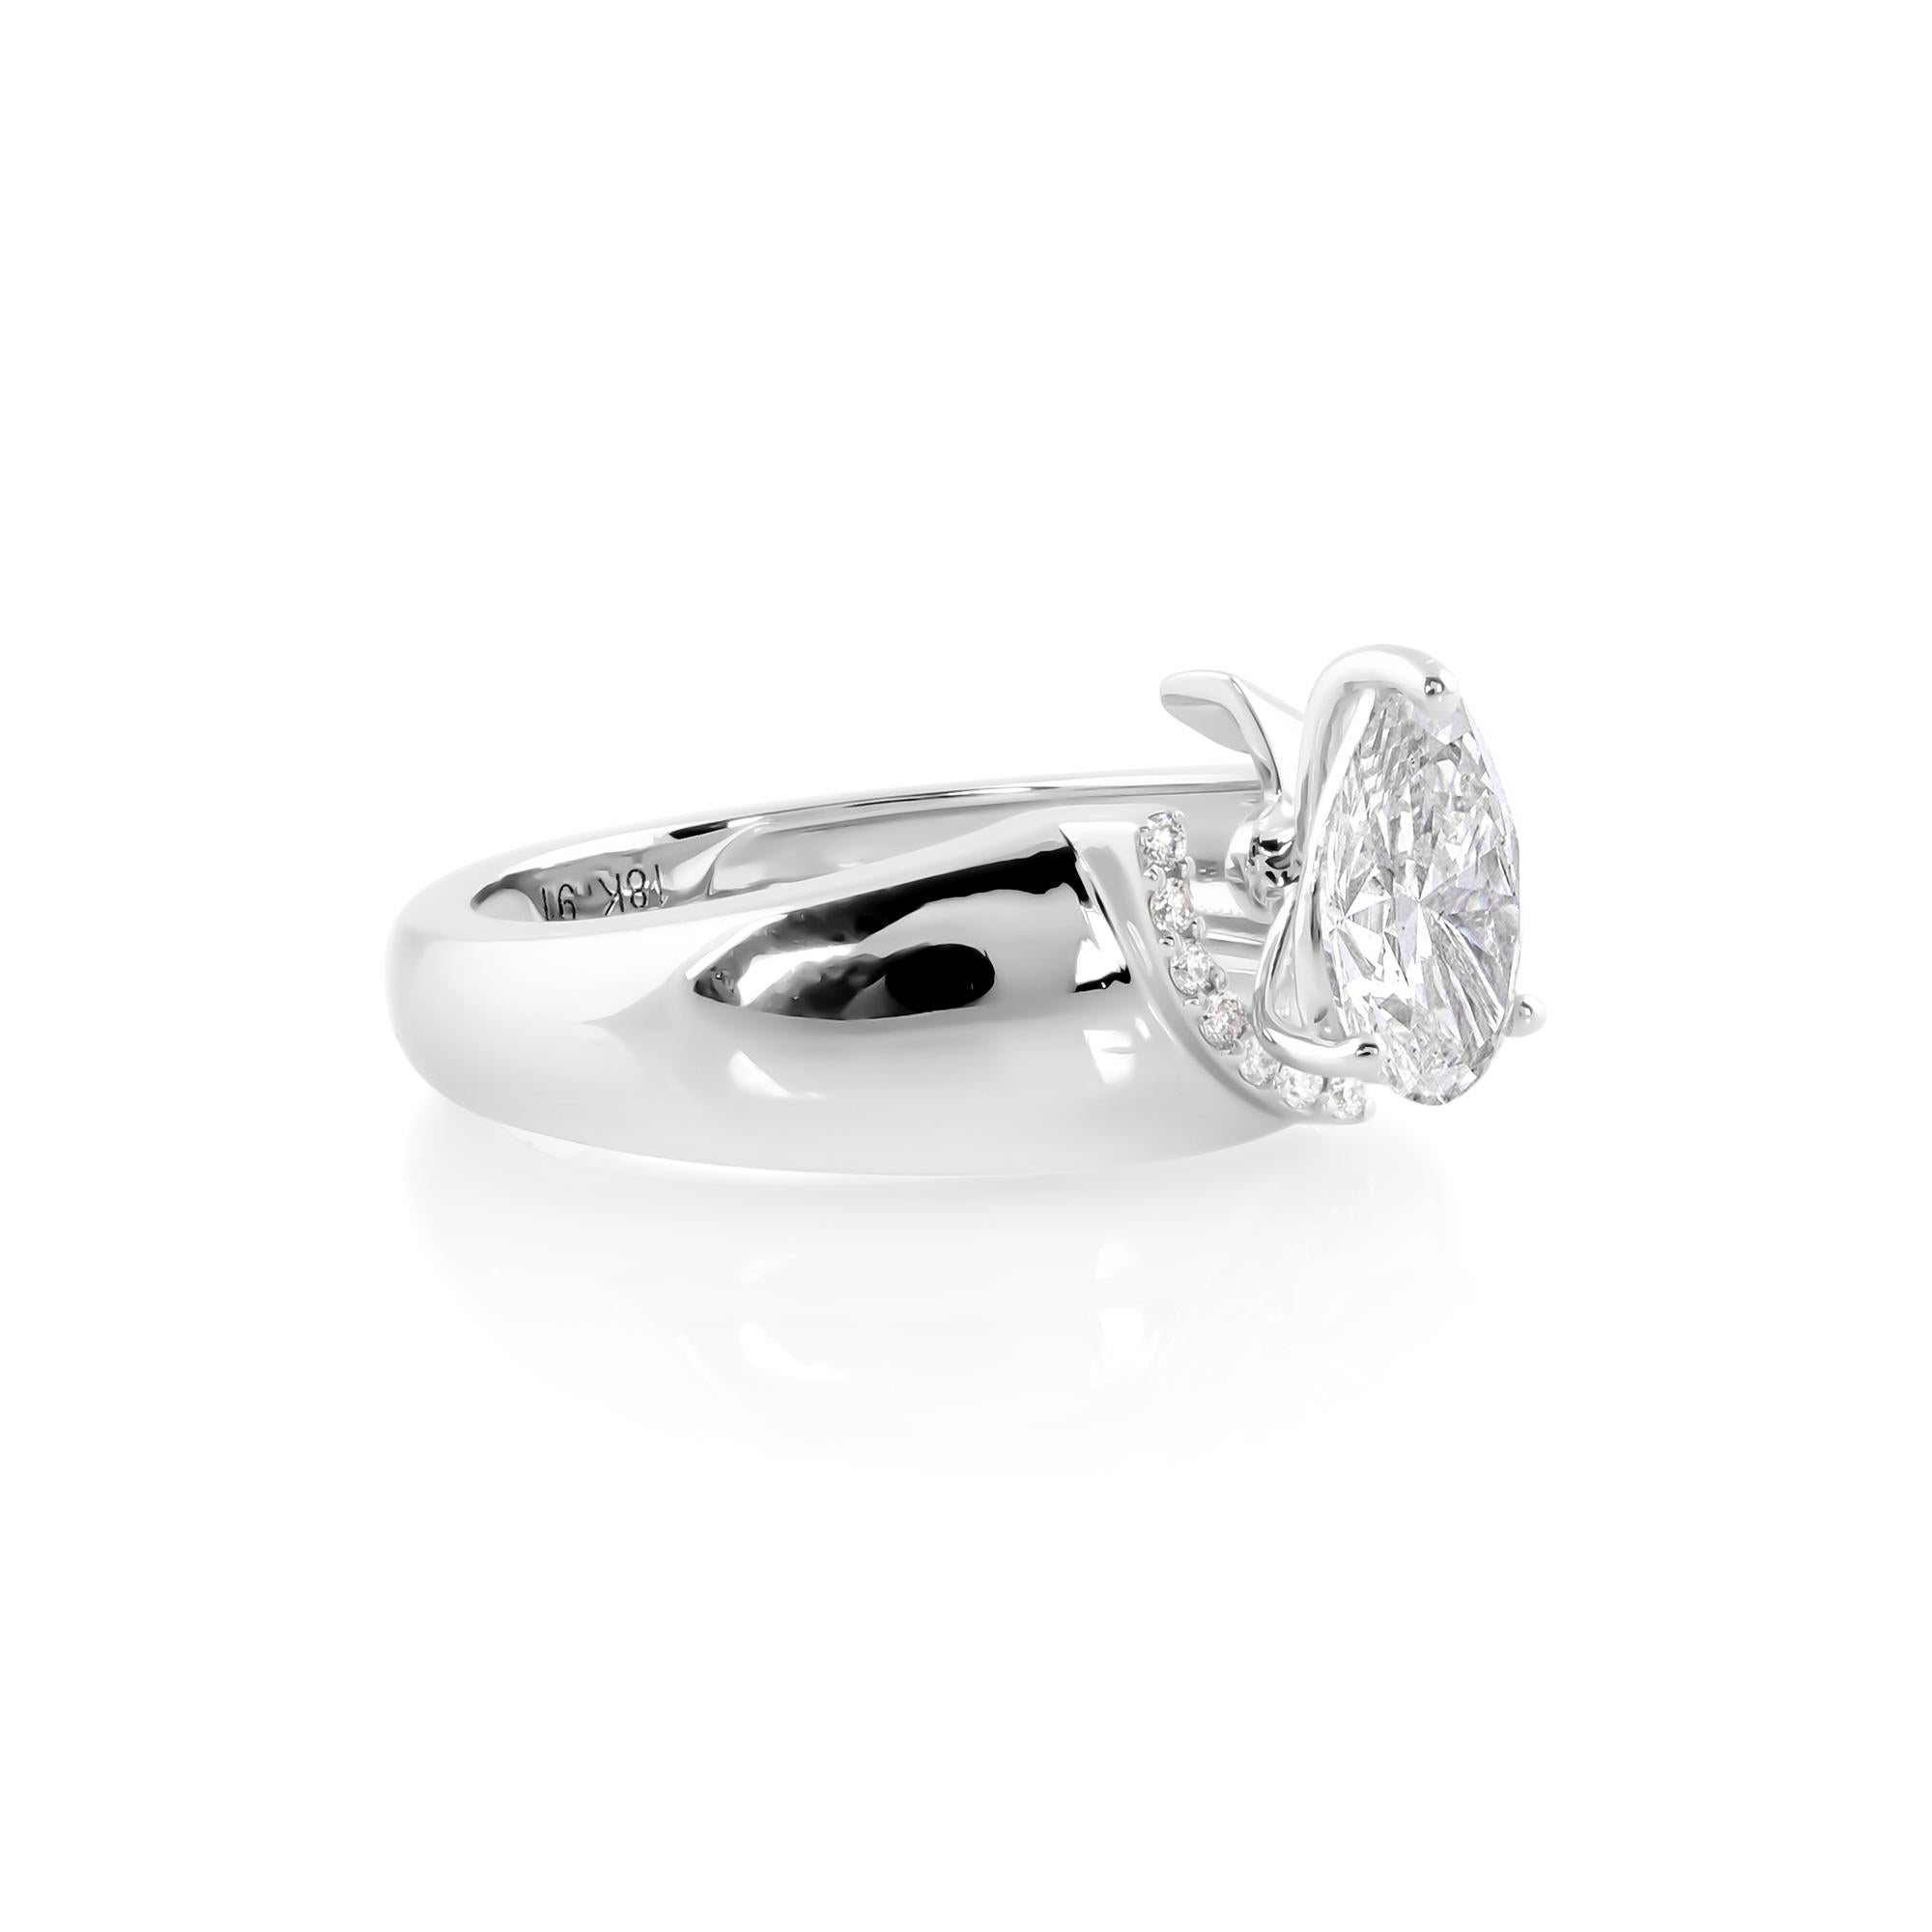 The simplicity of the design allows the natural beauty of the diamond to shine through, making this ring the perfect choice for those who appreciate understated elegance and timeless sophistication. Whether worn as an engagement ring, a symbol of